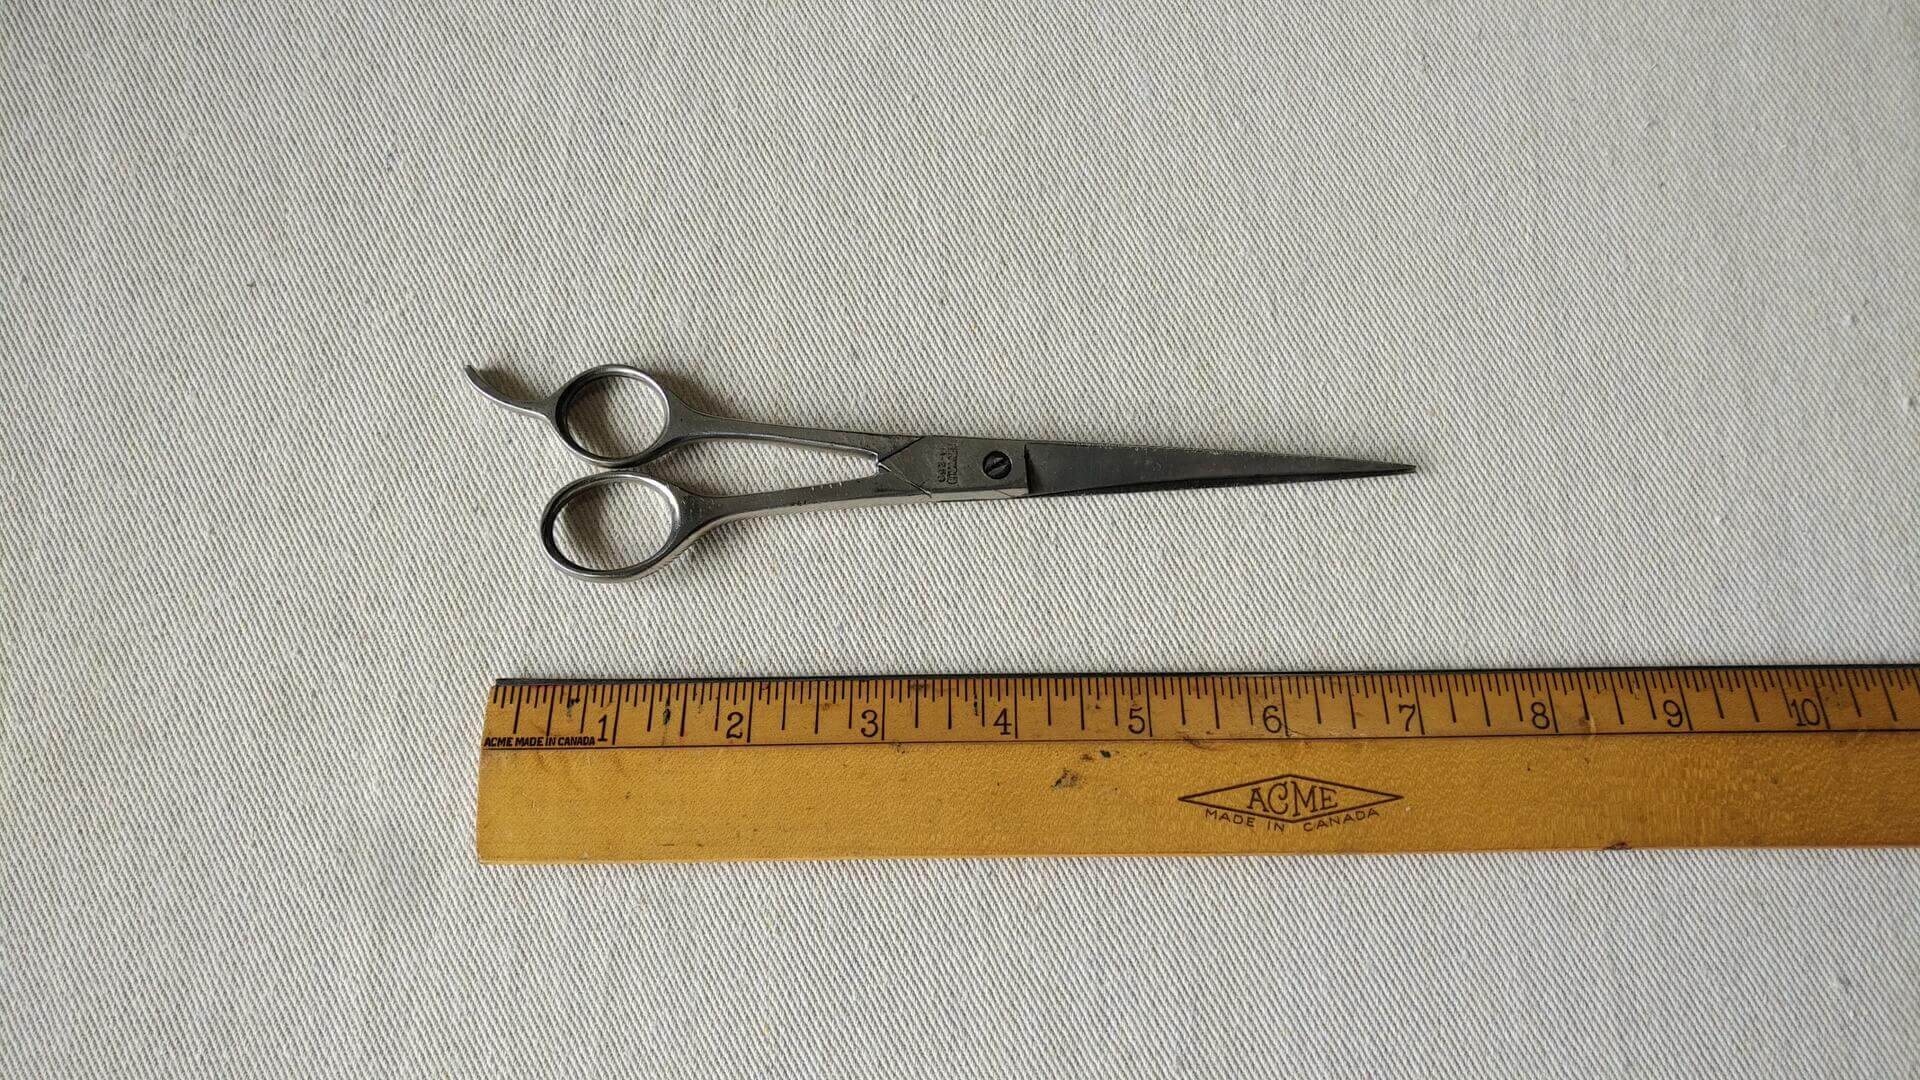 Vintage Panamex Fermarud hair cutting and thinning scissors shears 7 inches long. Antique made in Italy collectible hairdresser and barber tools & supplies